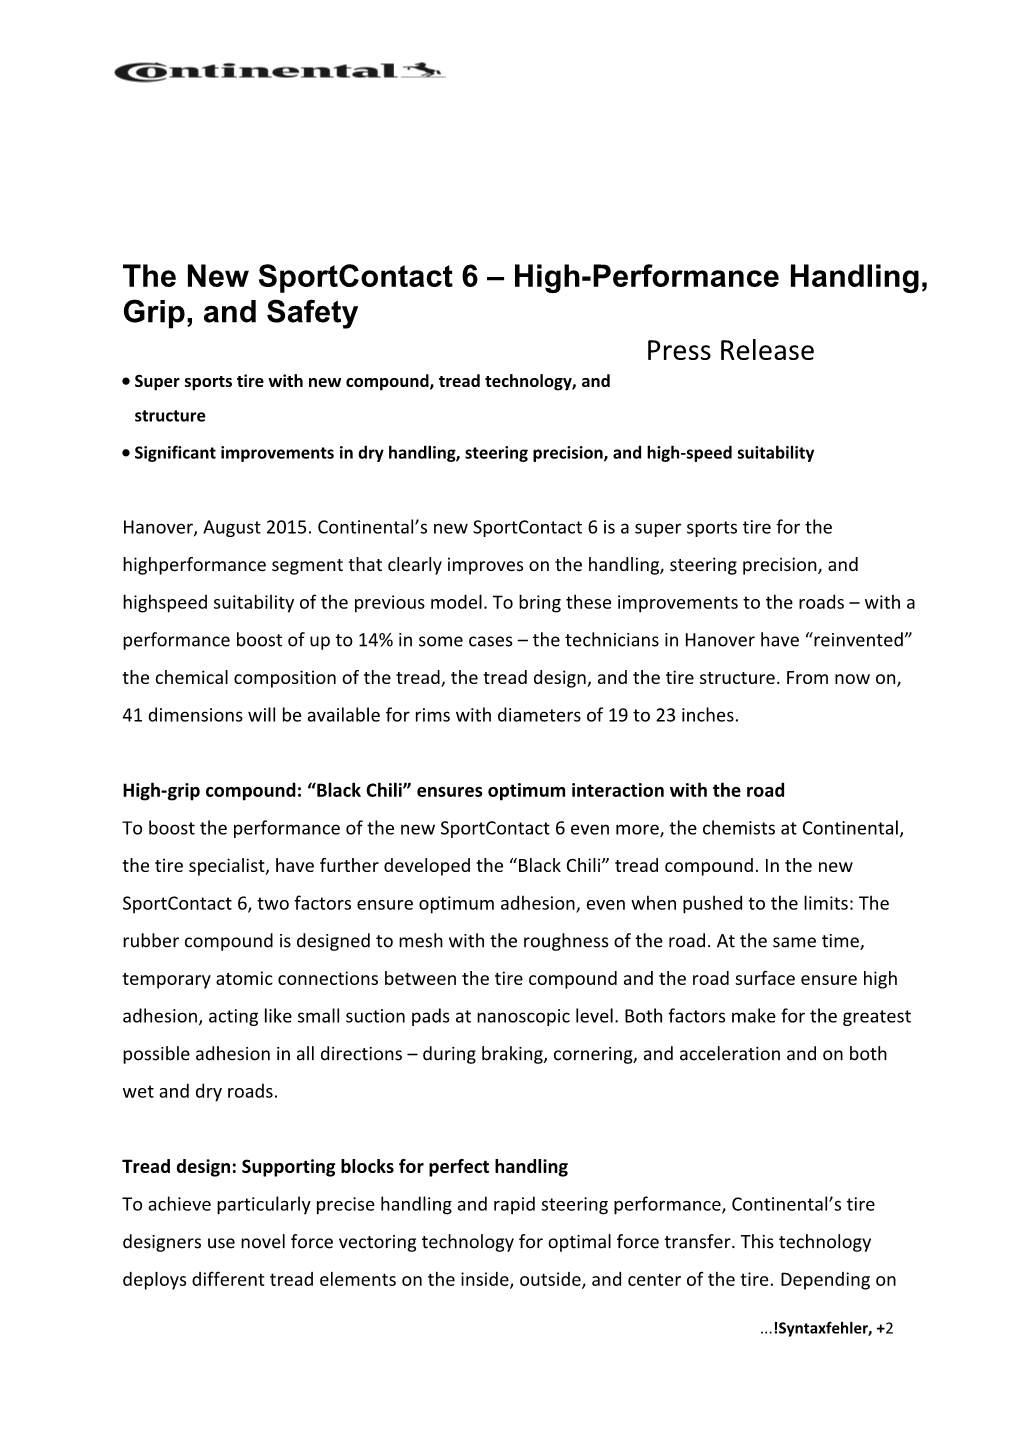 The New Sportcontact 6 High-Performance Handling, Grip, and Safety